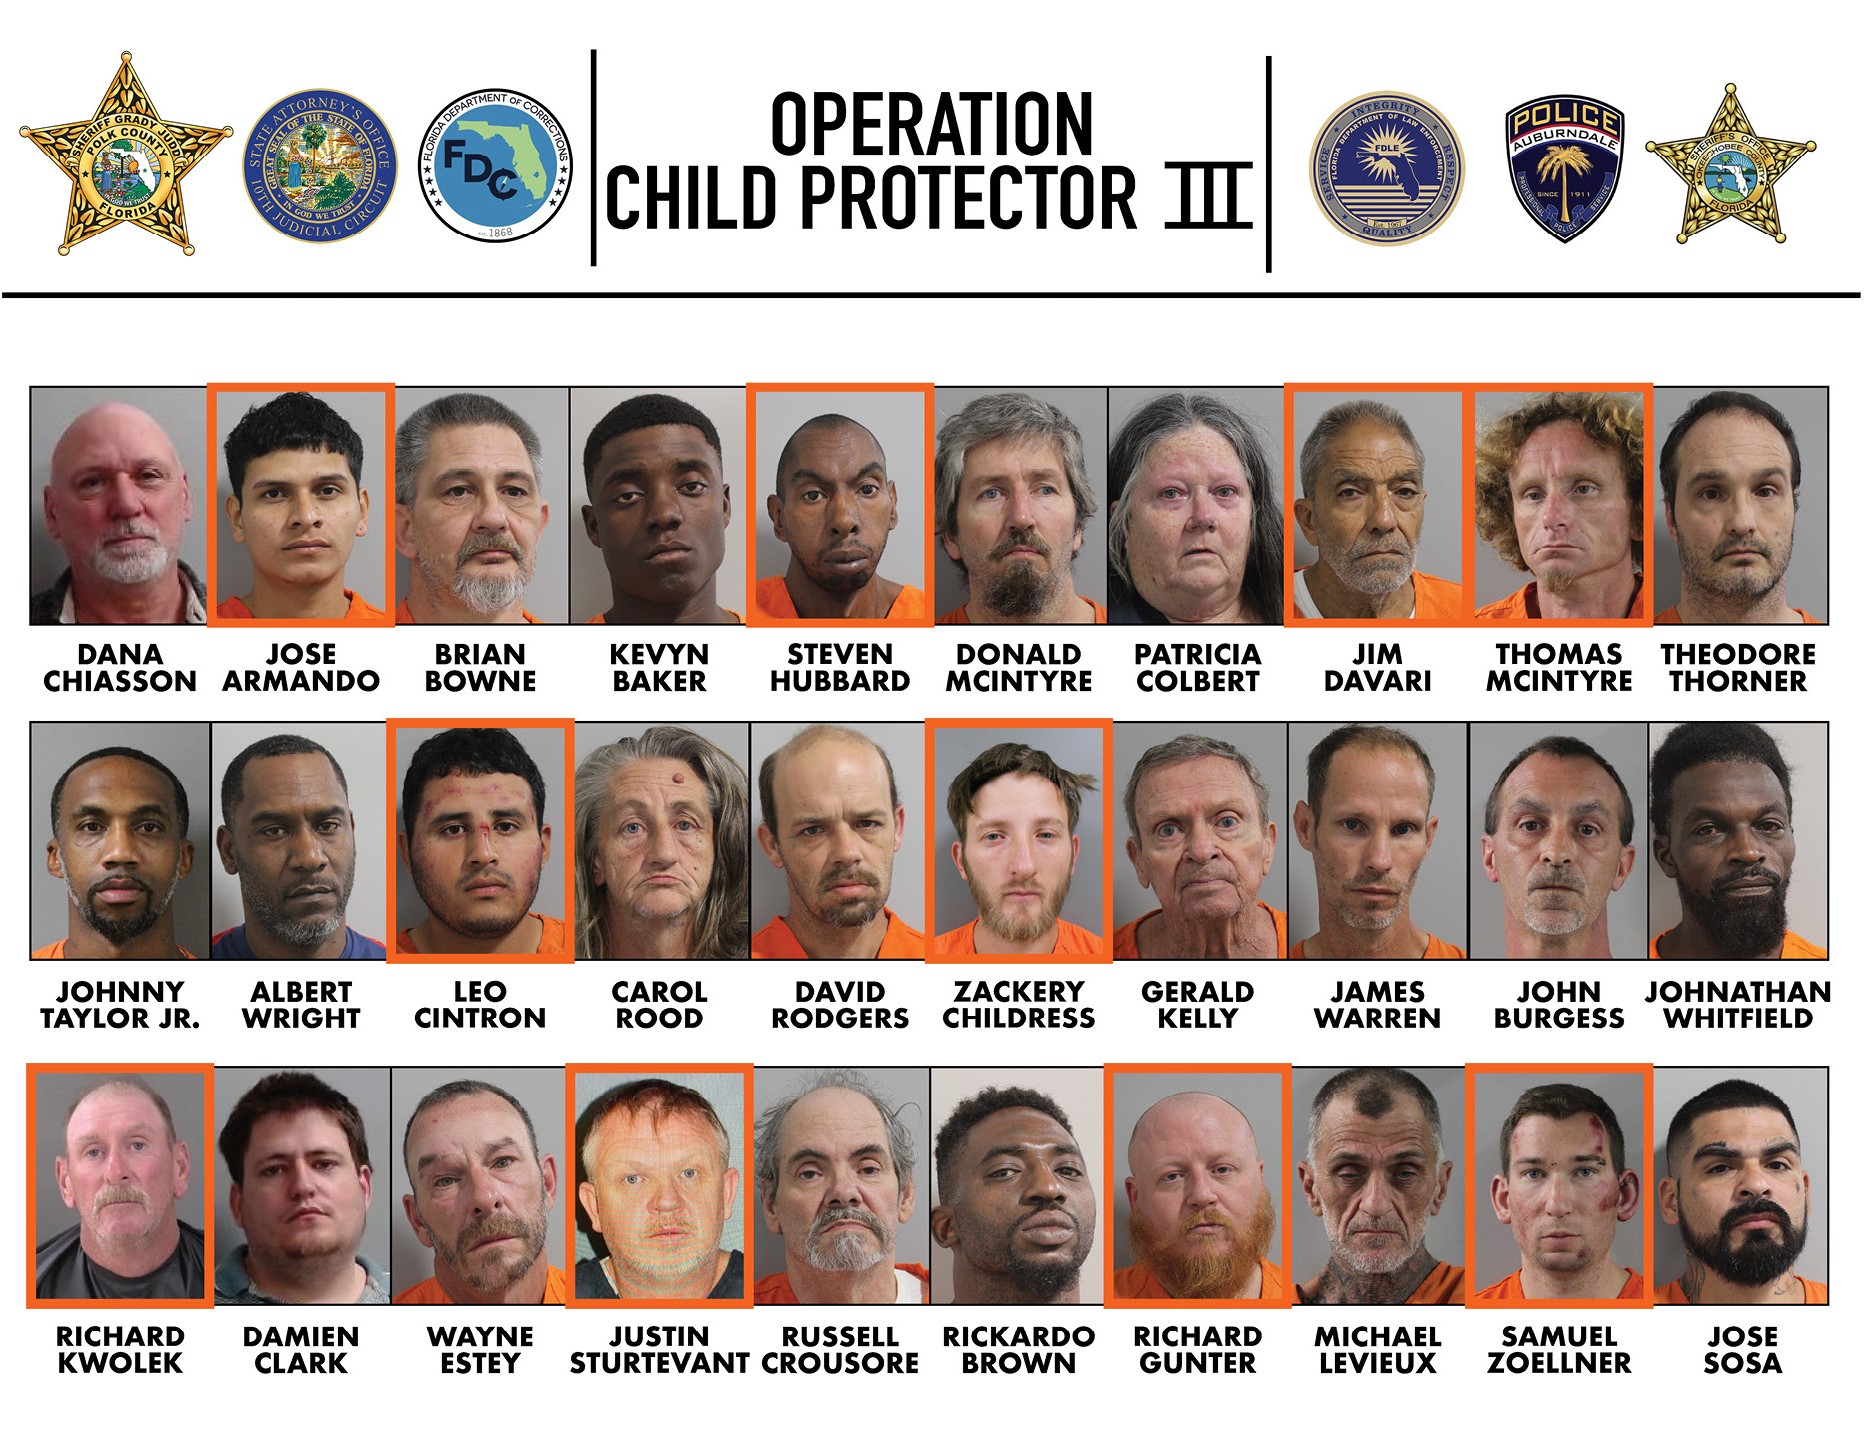 30 suspects arrested during investigation focused on protecting children from sexual offenders and predators